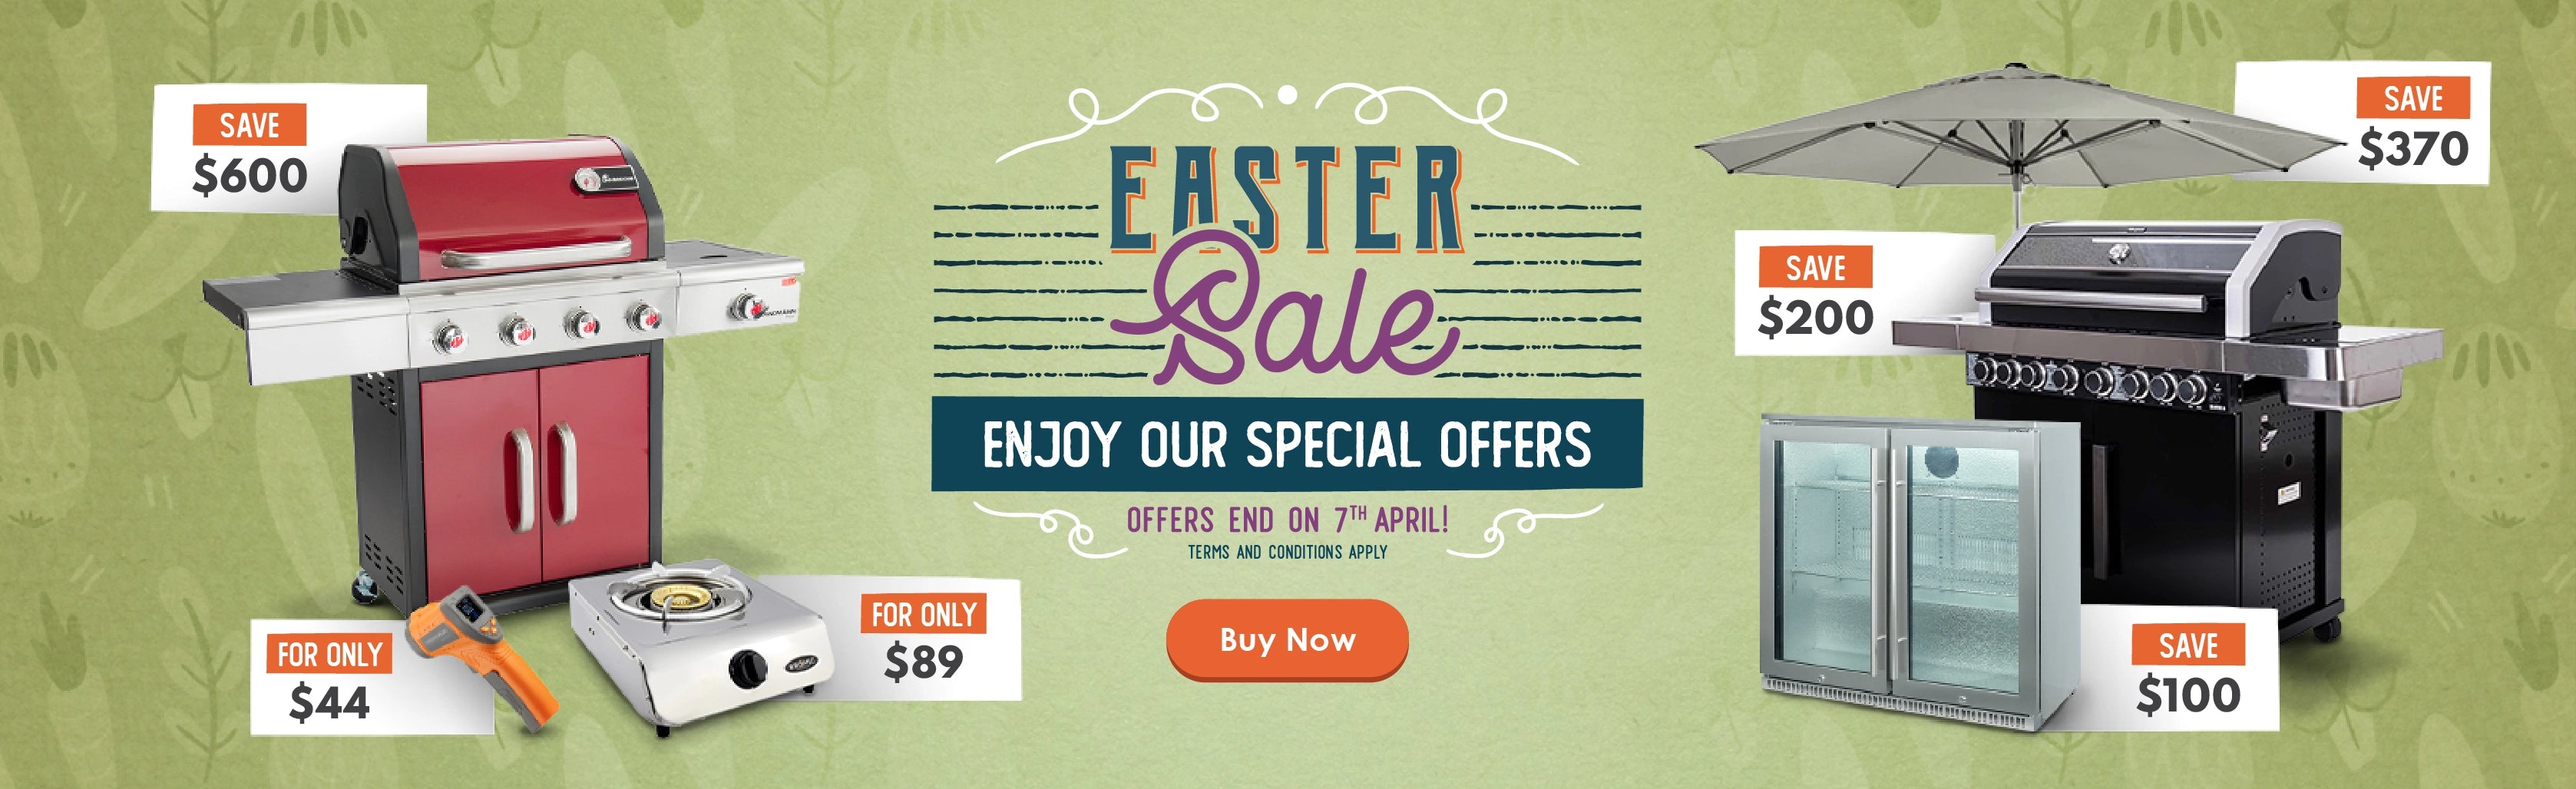 Easter Sale, Sale, Offers, BBQ, Discounts 